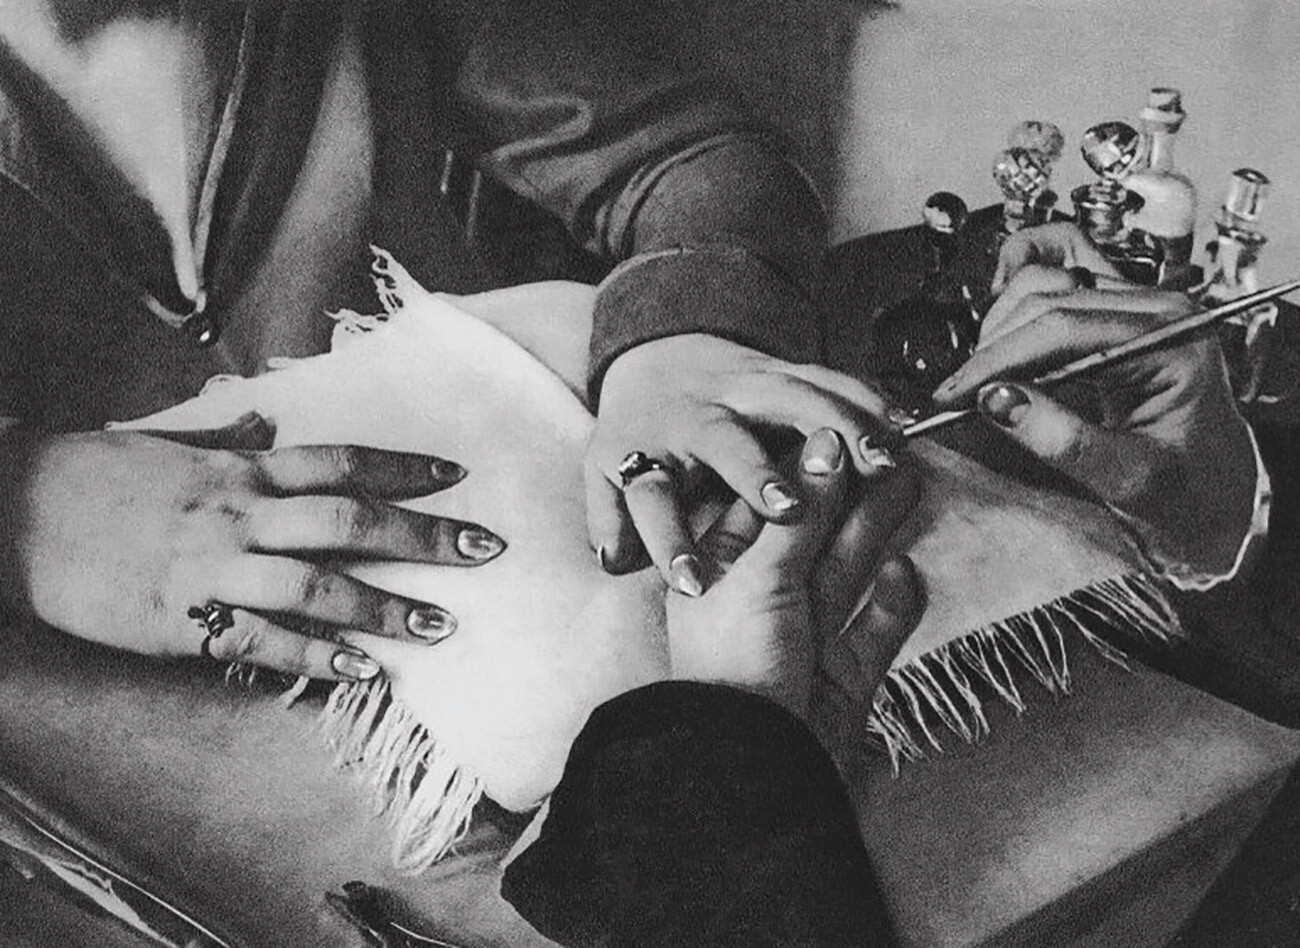 Manicure of the 1920s